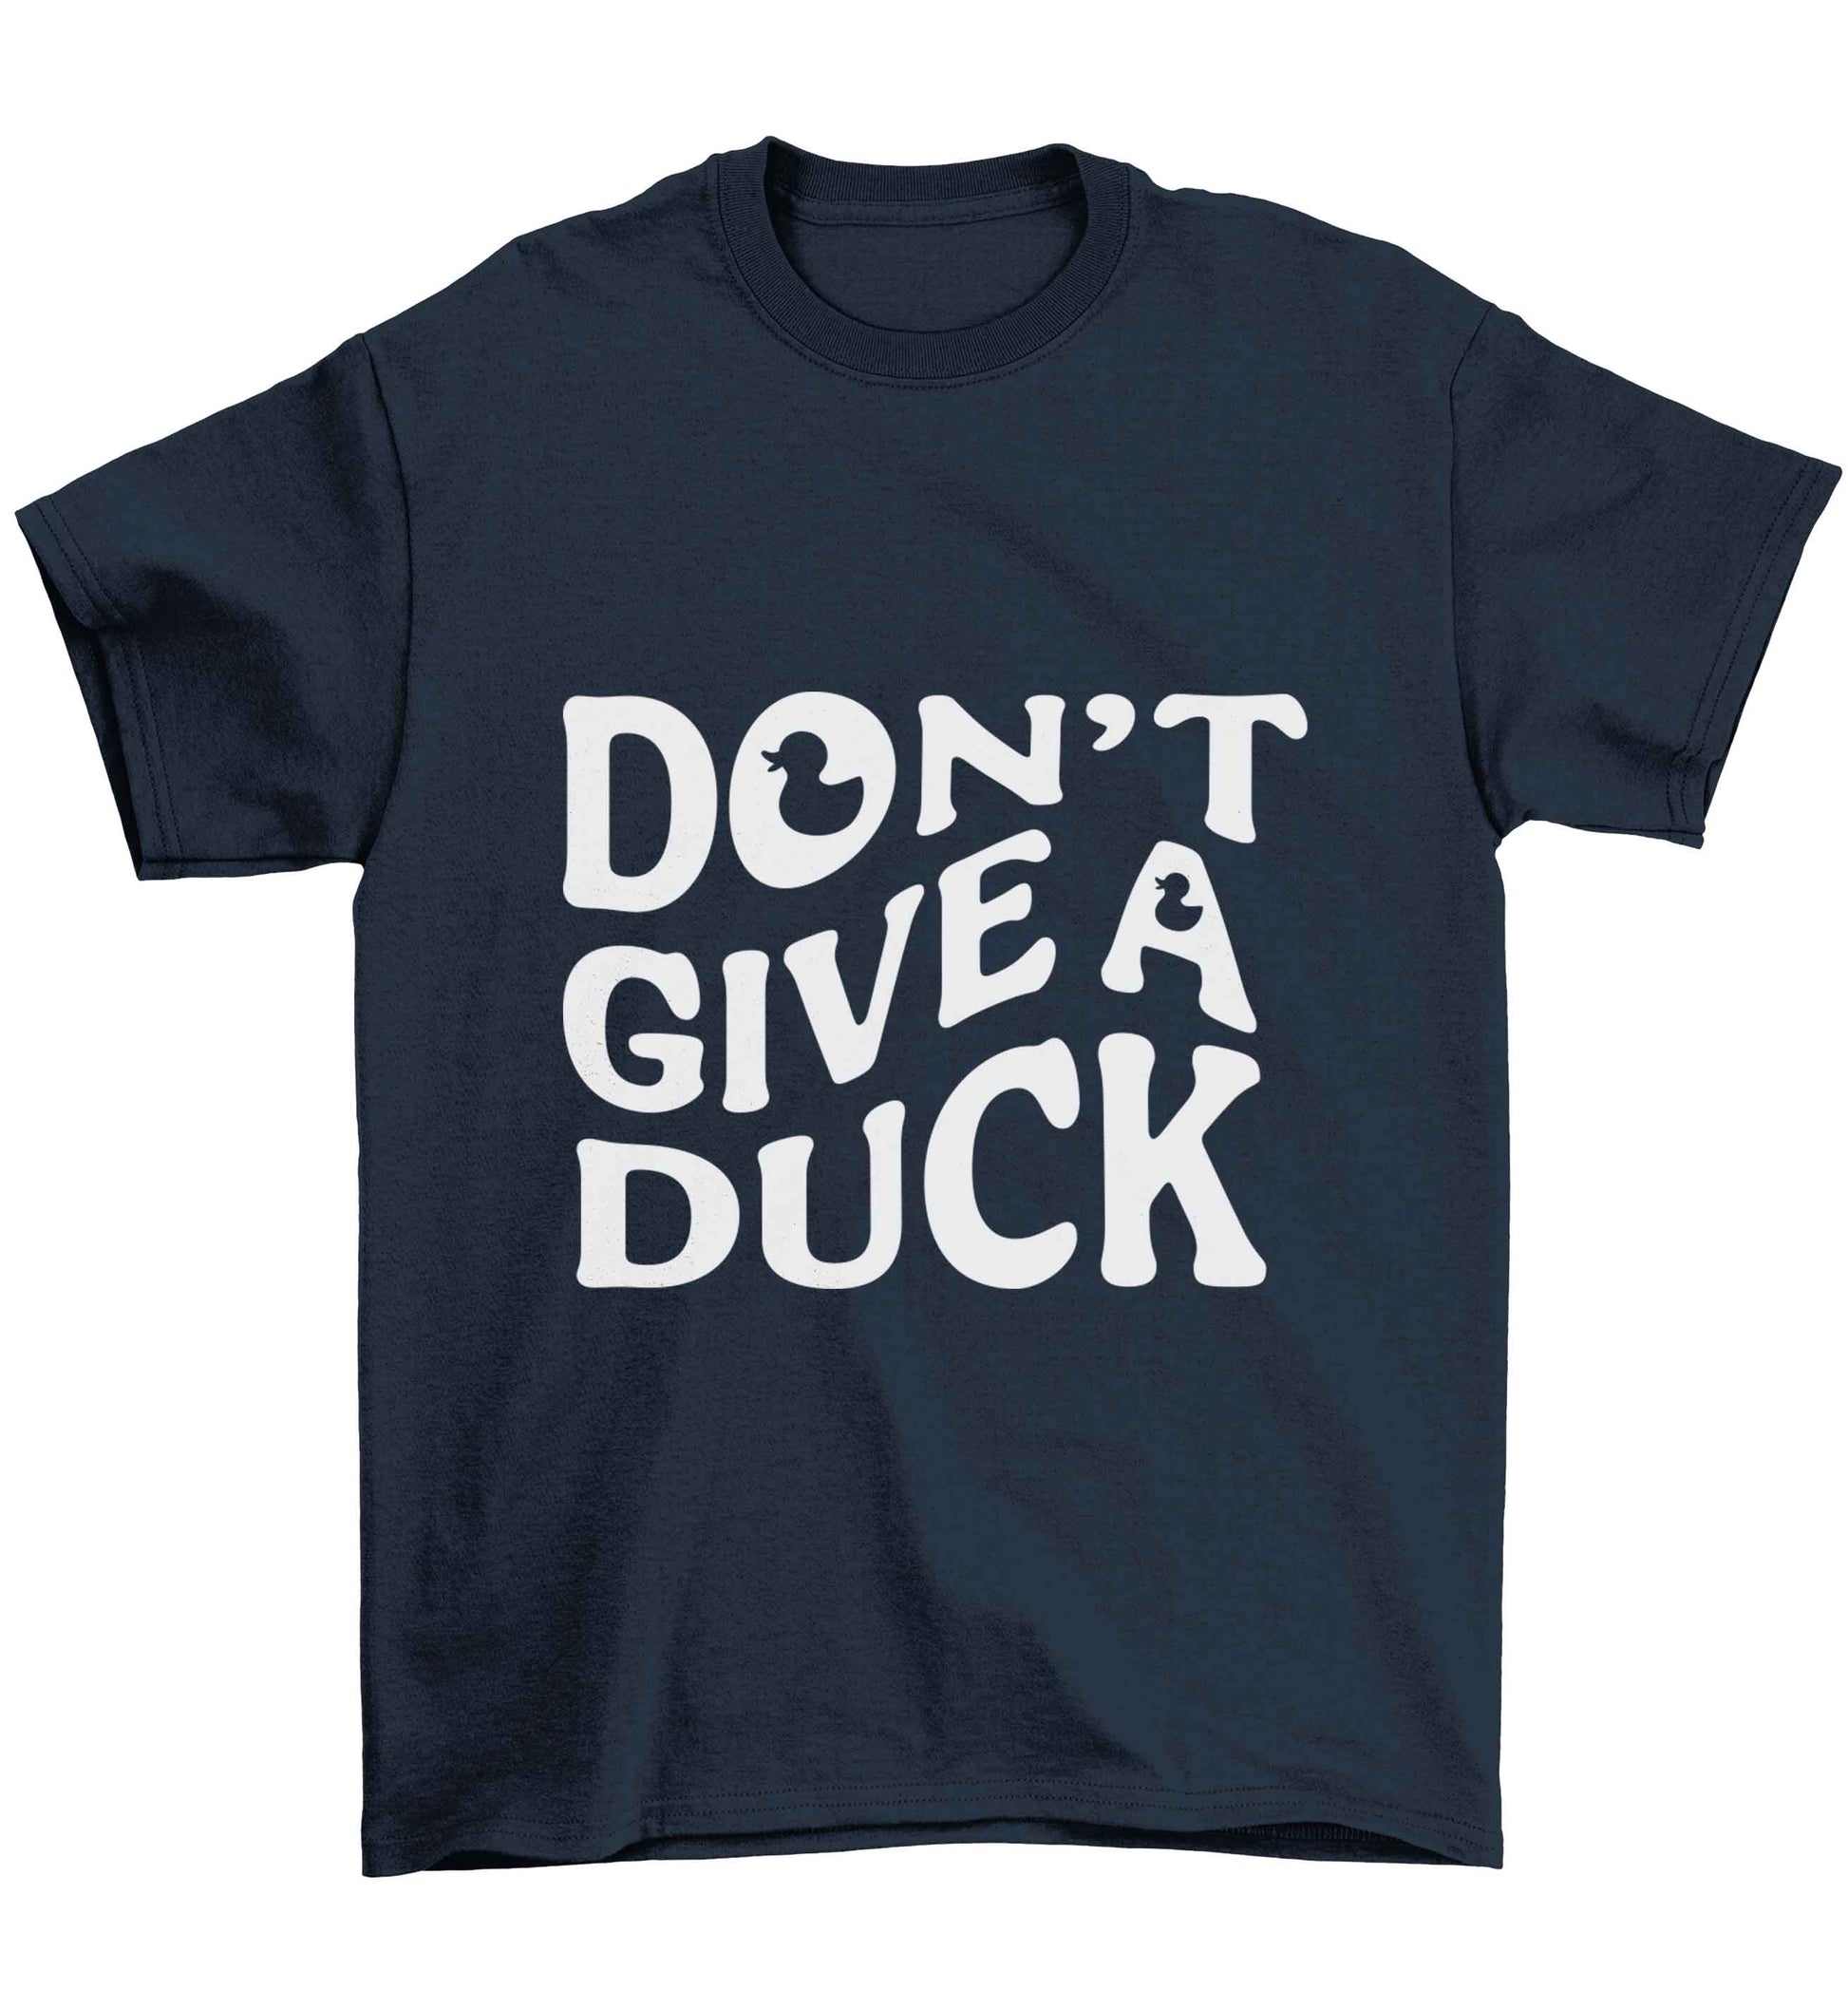 Don't give a duck Children's navy Tshirt 12-13 Years